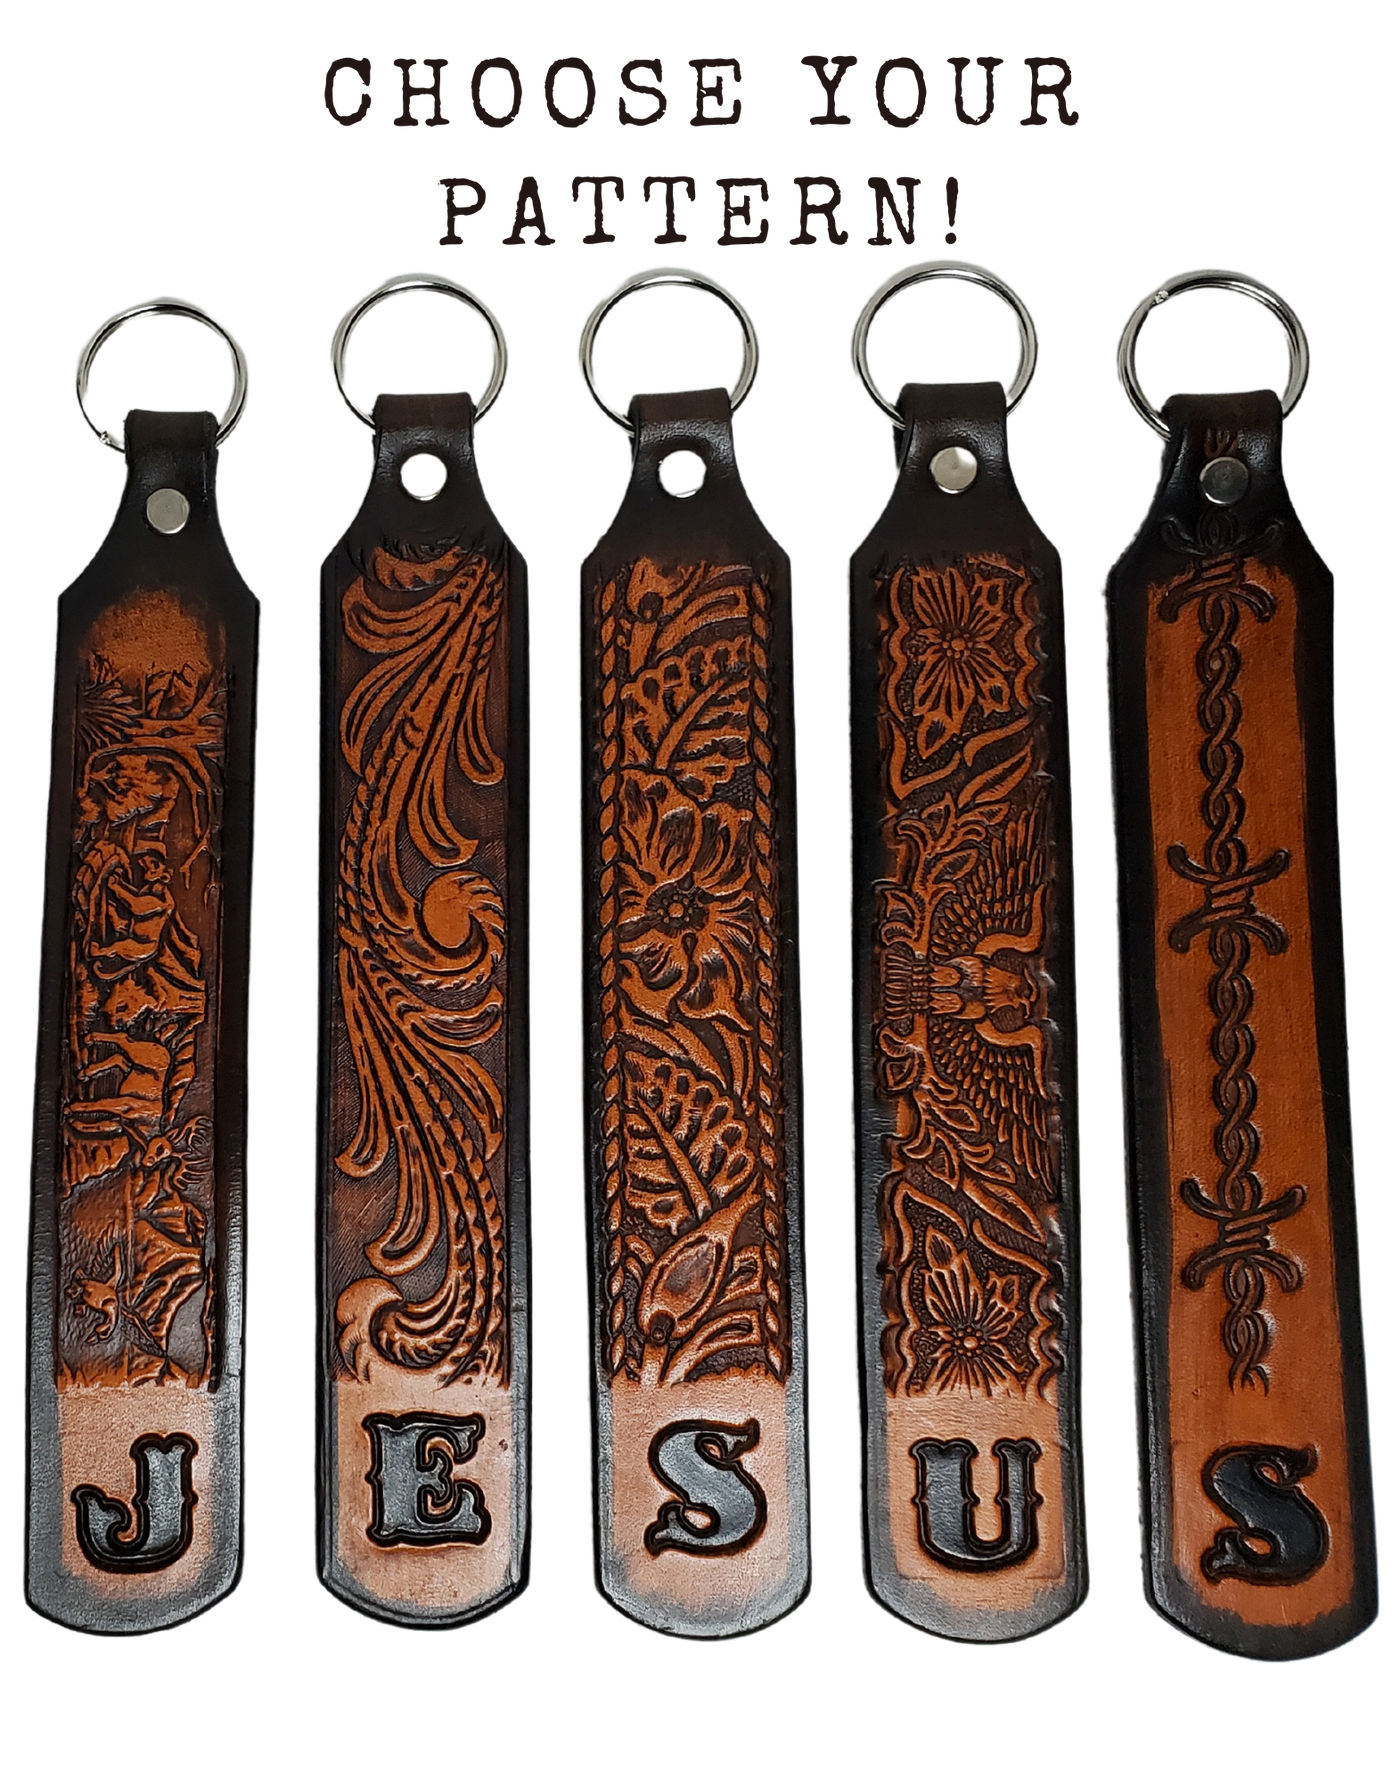 Our Customizable "1975" Longer Leather keychain embossed similar to our popular belts.  Great for identifying luggage, backpacks, or your keys! Available in the below choices All colored in our popular 2 TONE BROWN, pick one or a few. Made in our Smyrna, TN shop. Please type desired name in CUSTOM box.   Measures...approx. 1" x 7"